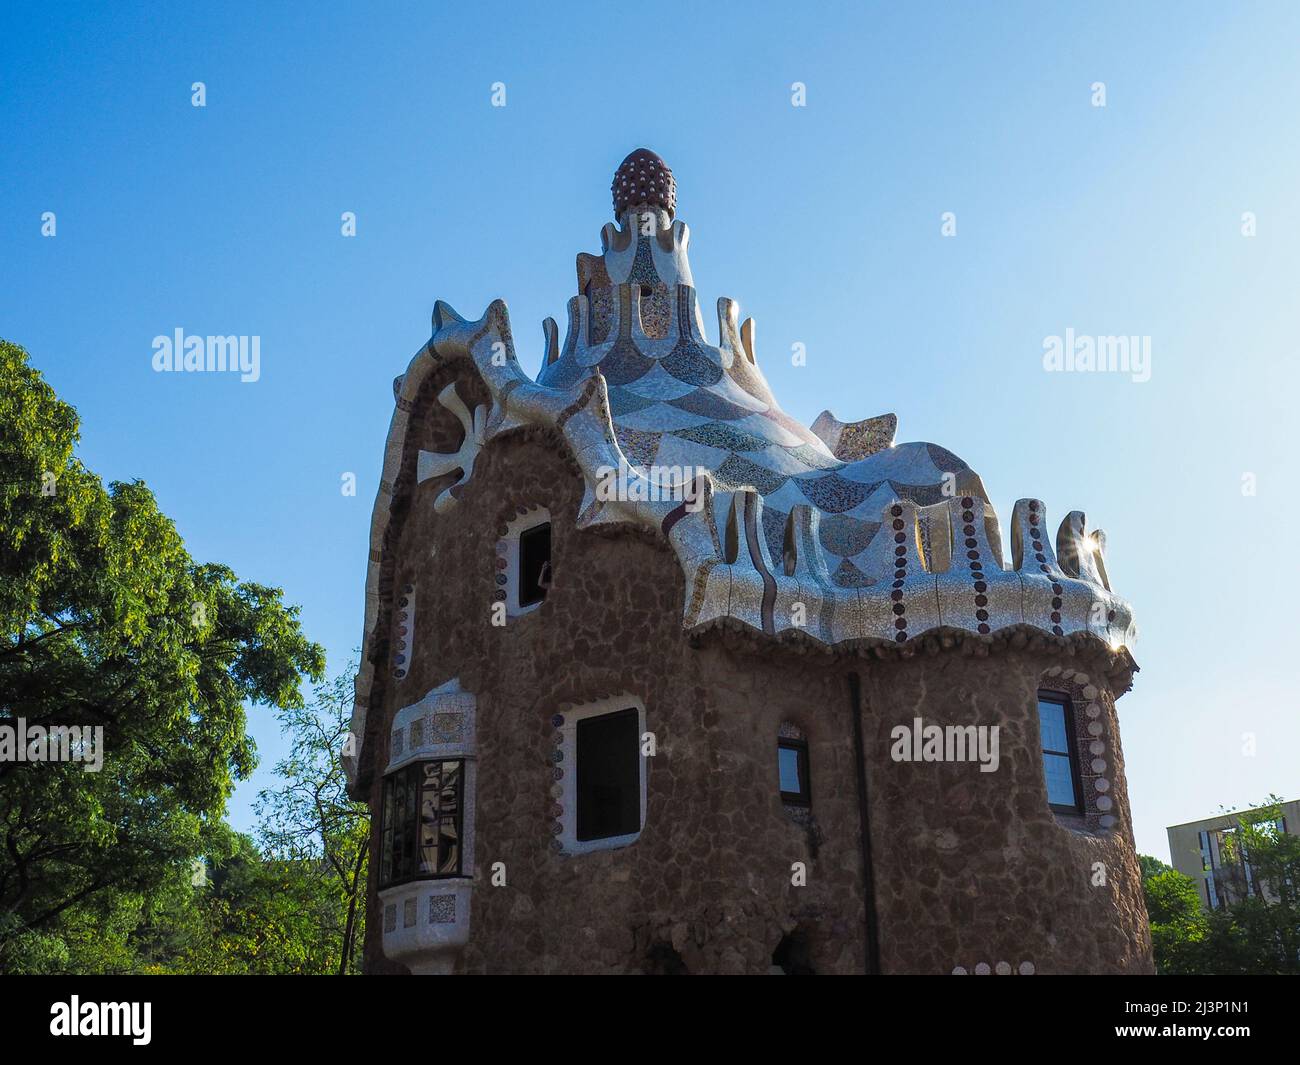 Parc Güell Garden complex with architectural elements  Designed by the Catalan architect Antoni Gaudí, Spain, Europe Stock Photo